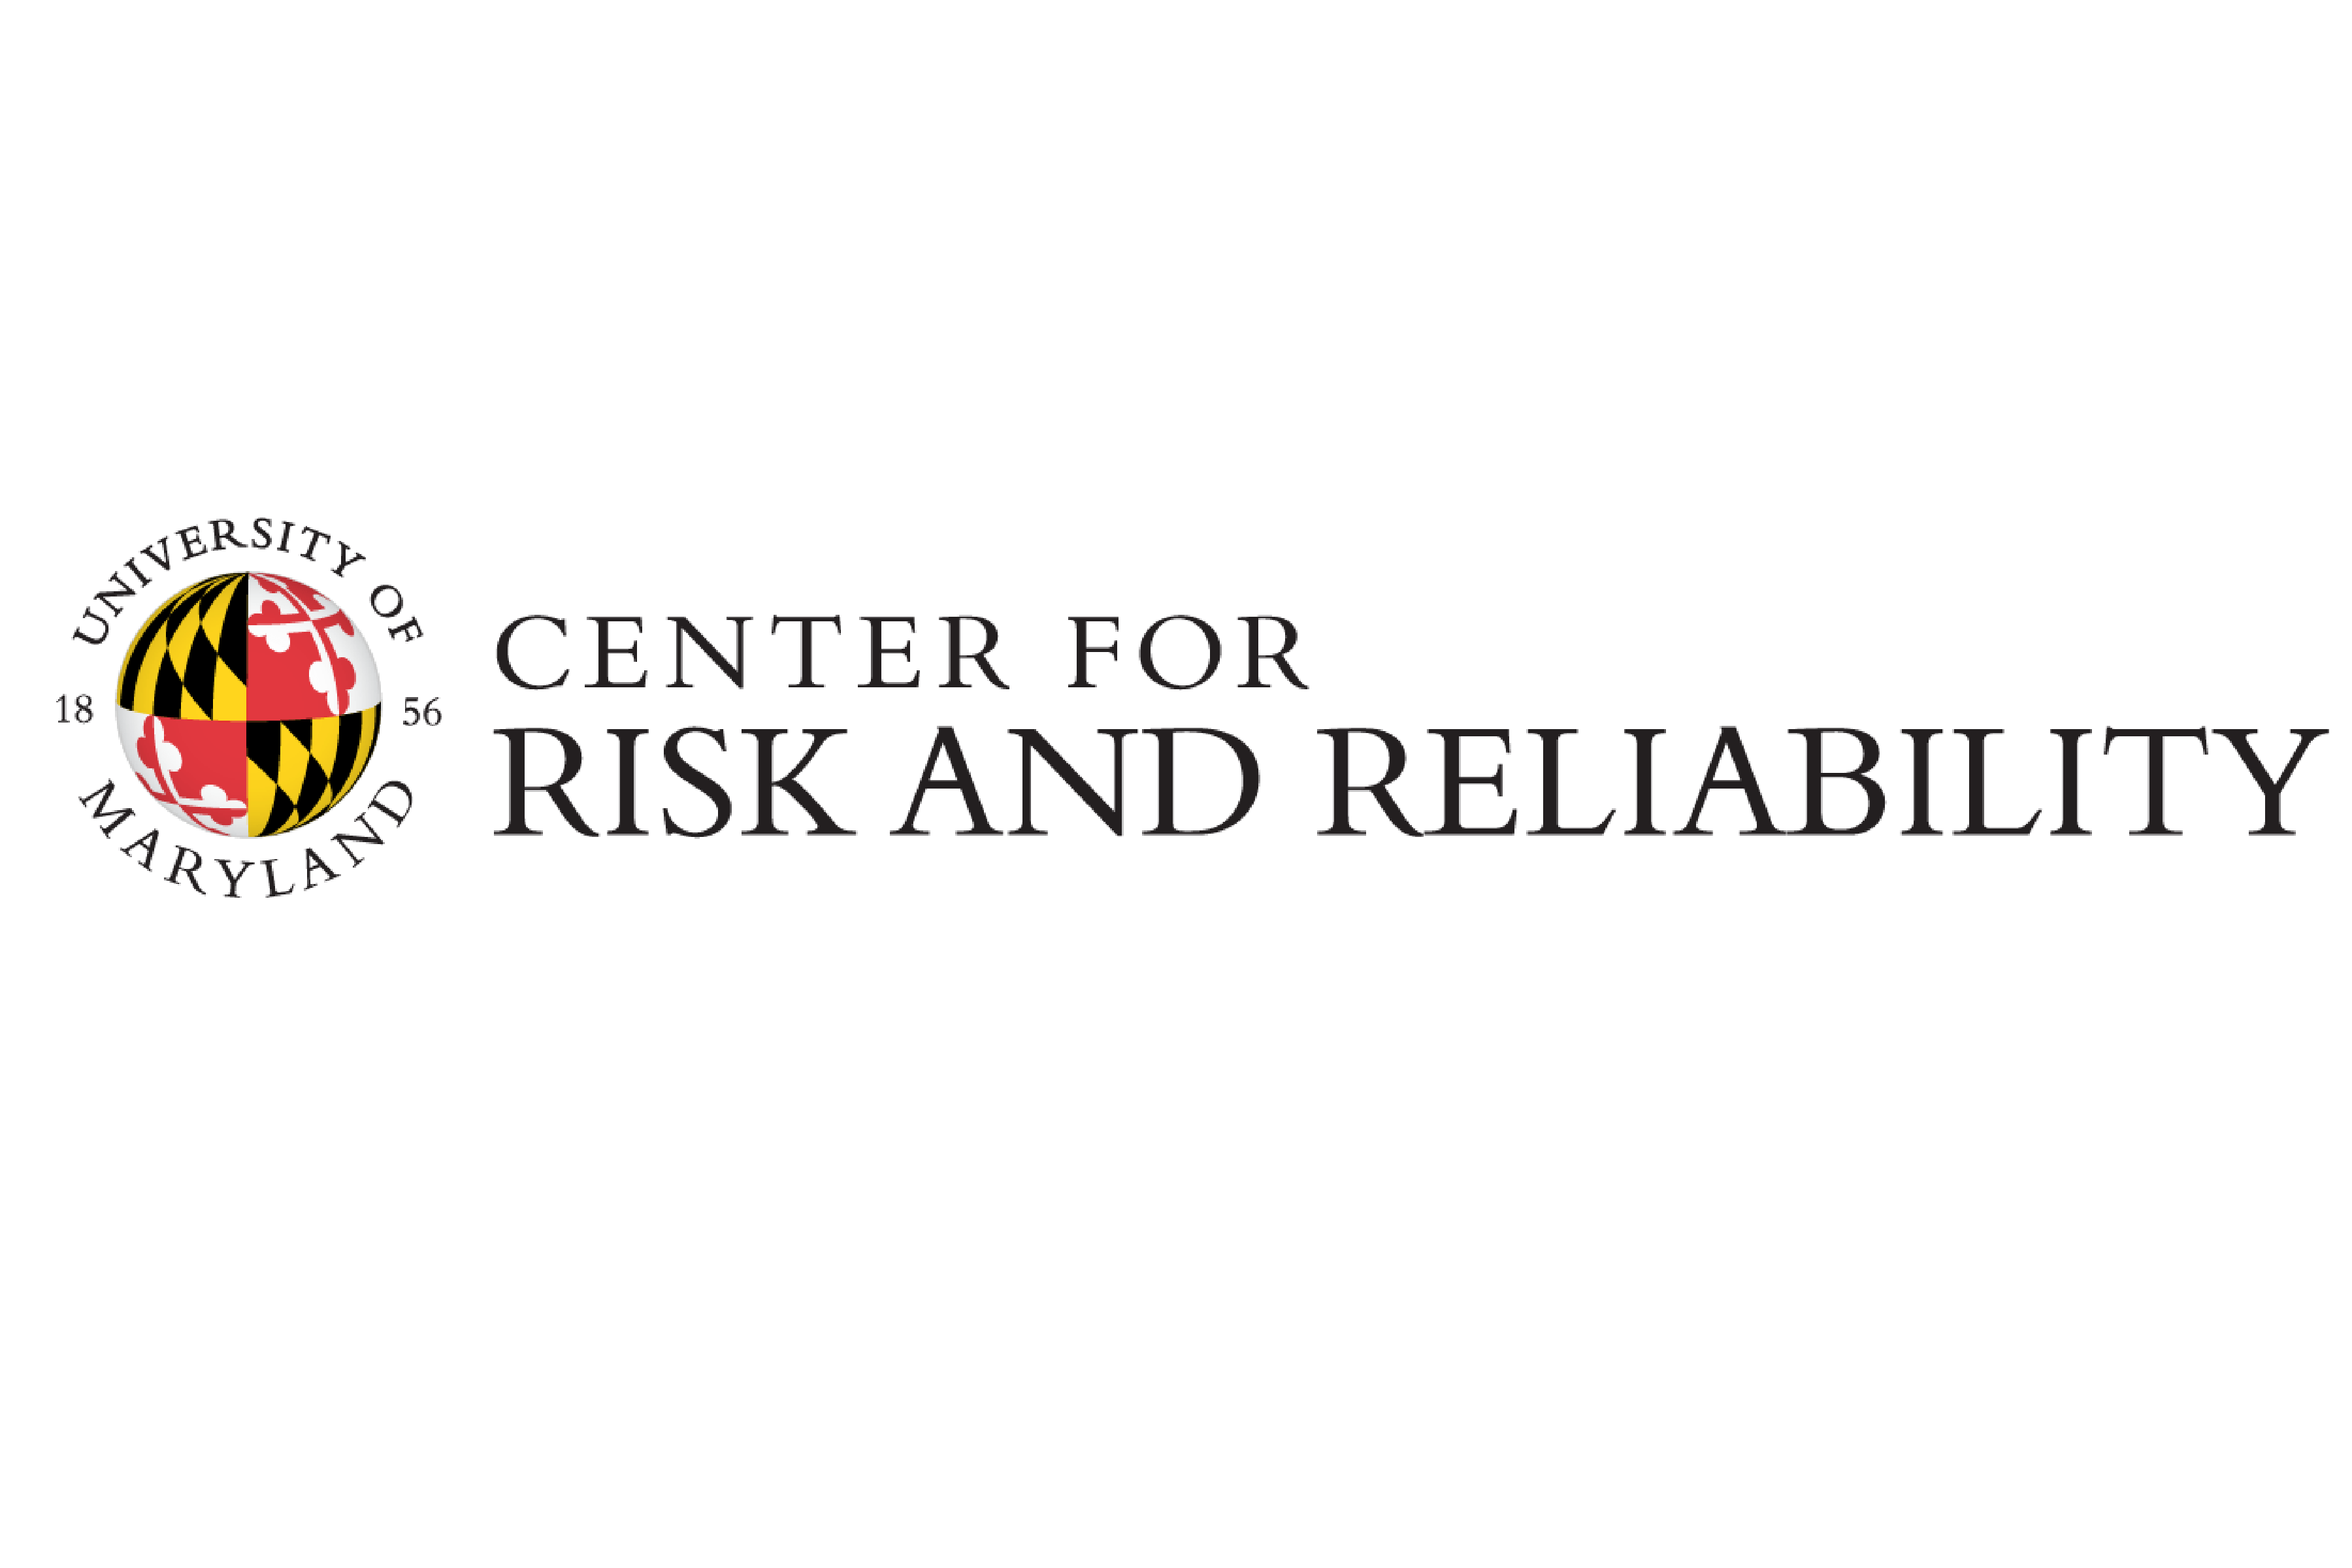 Center for Risk and Reliability